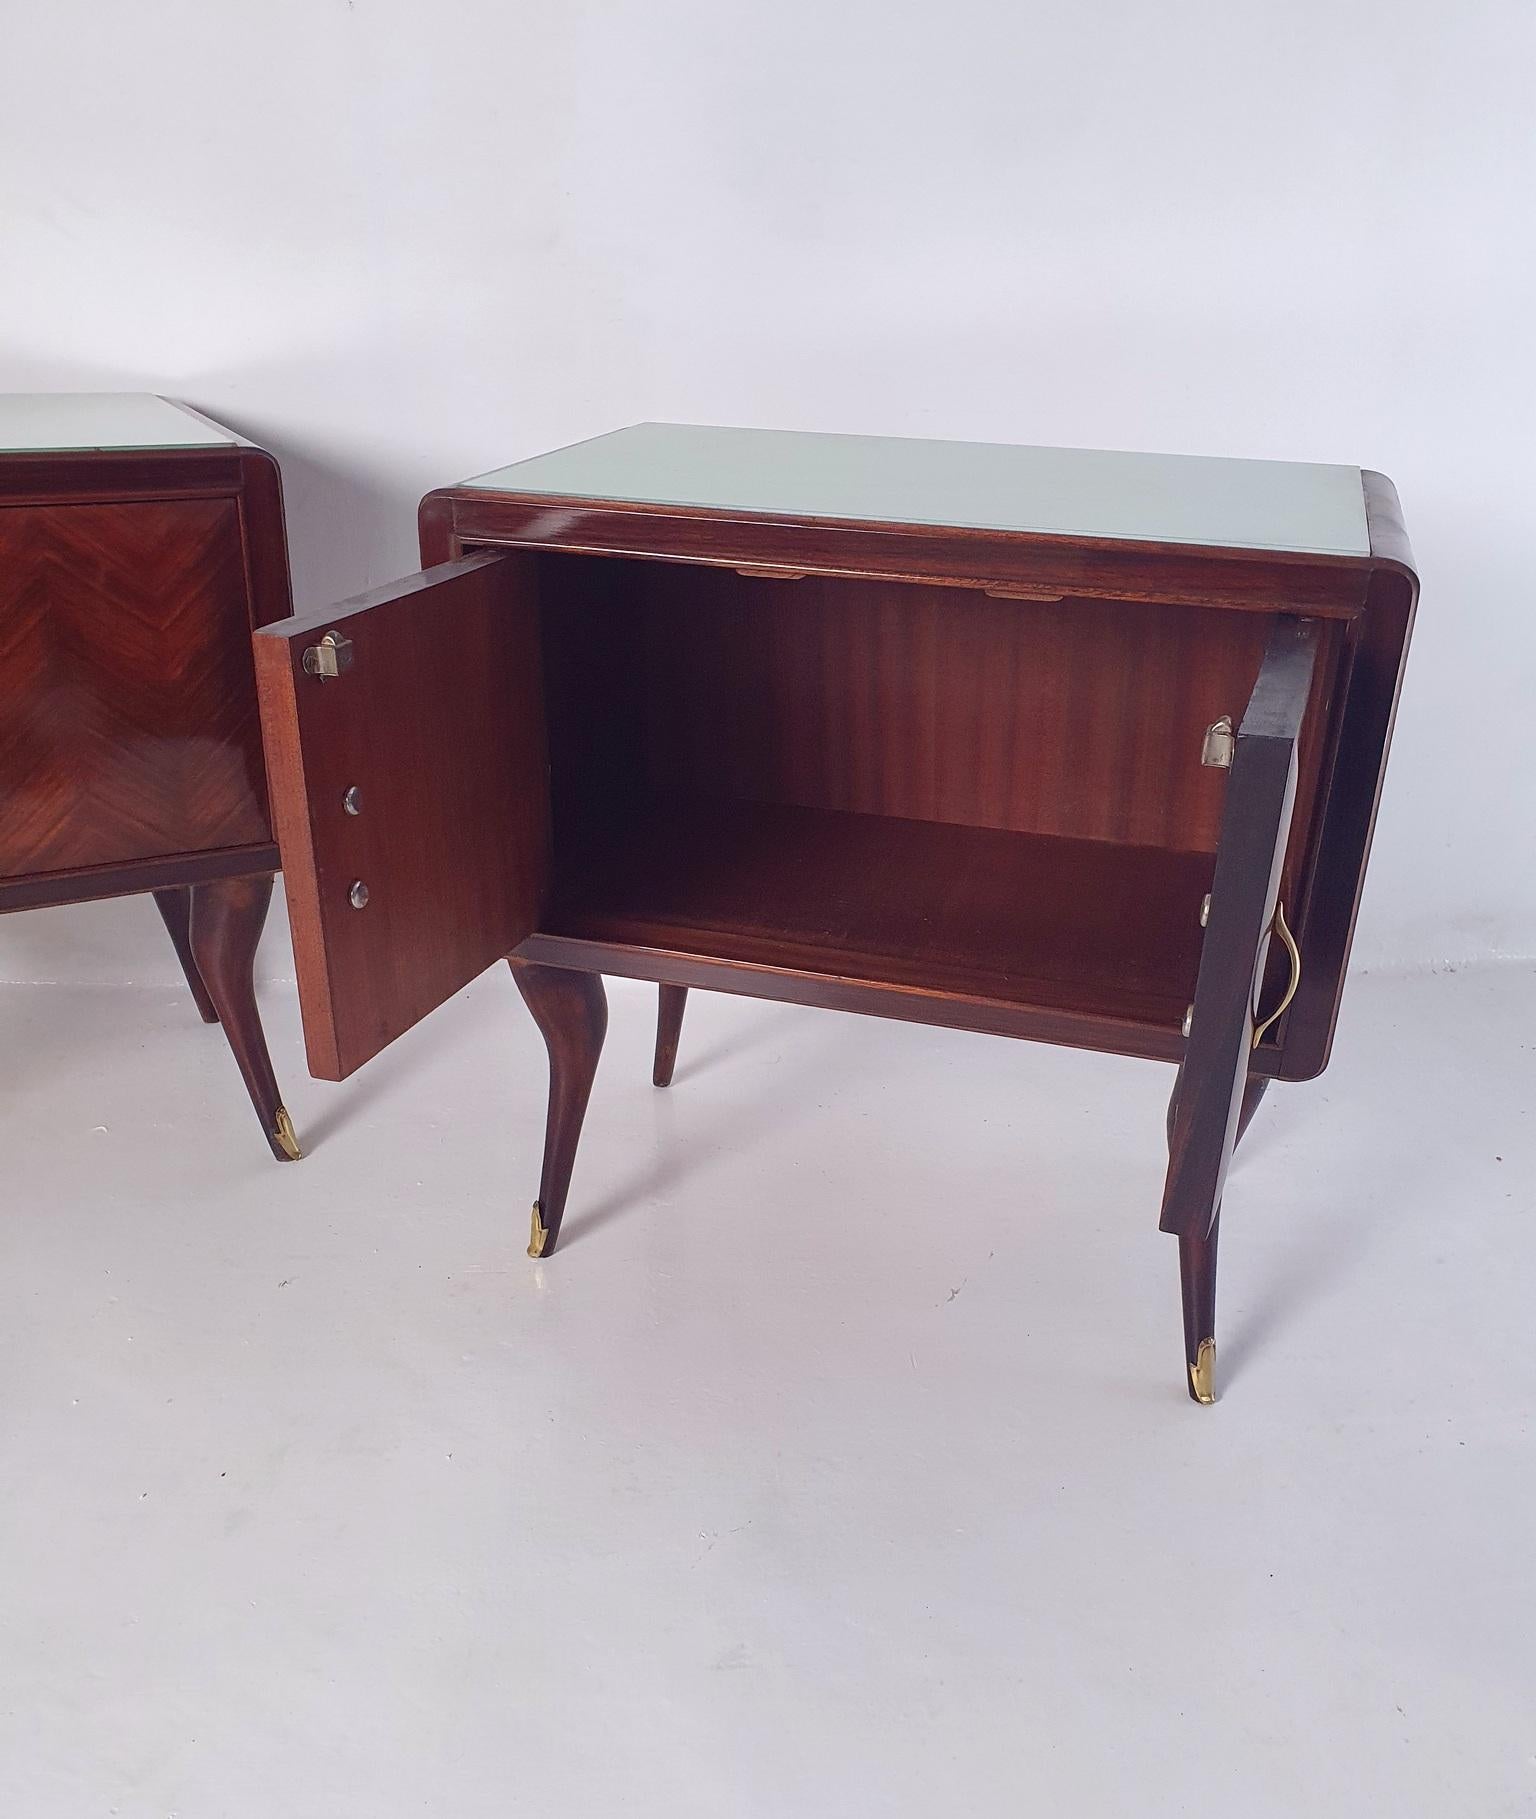 Pair of Nightstands in style of Ico Parisi, Italy 1